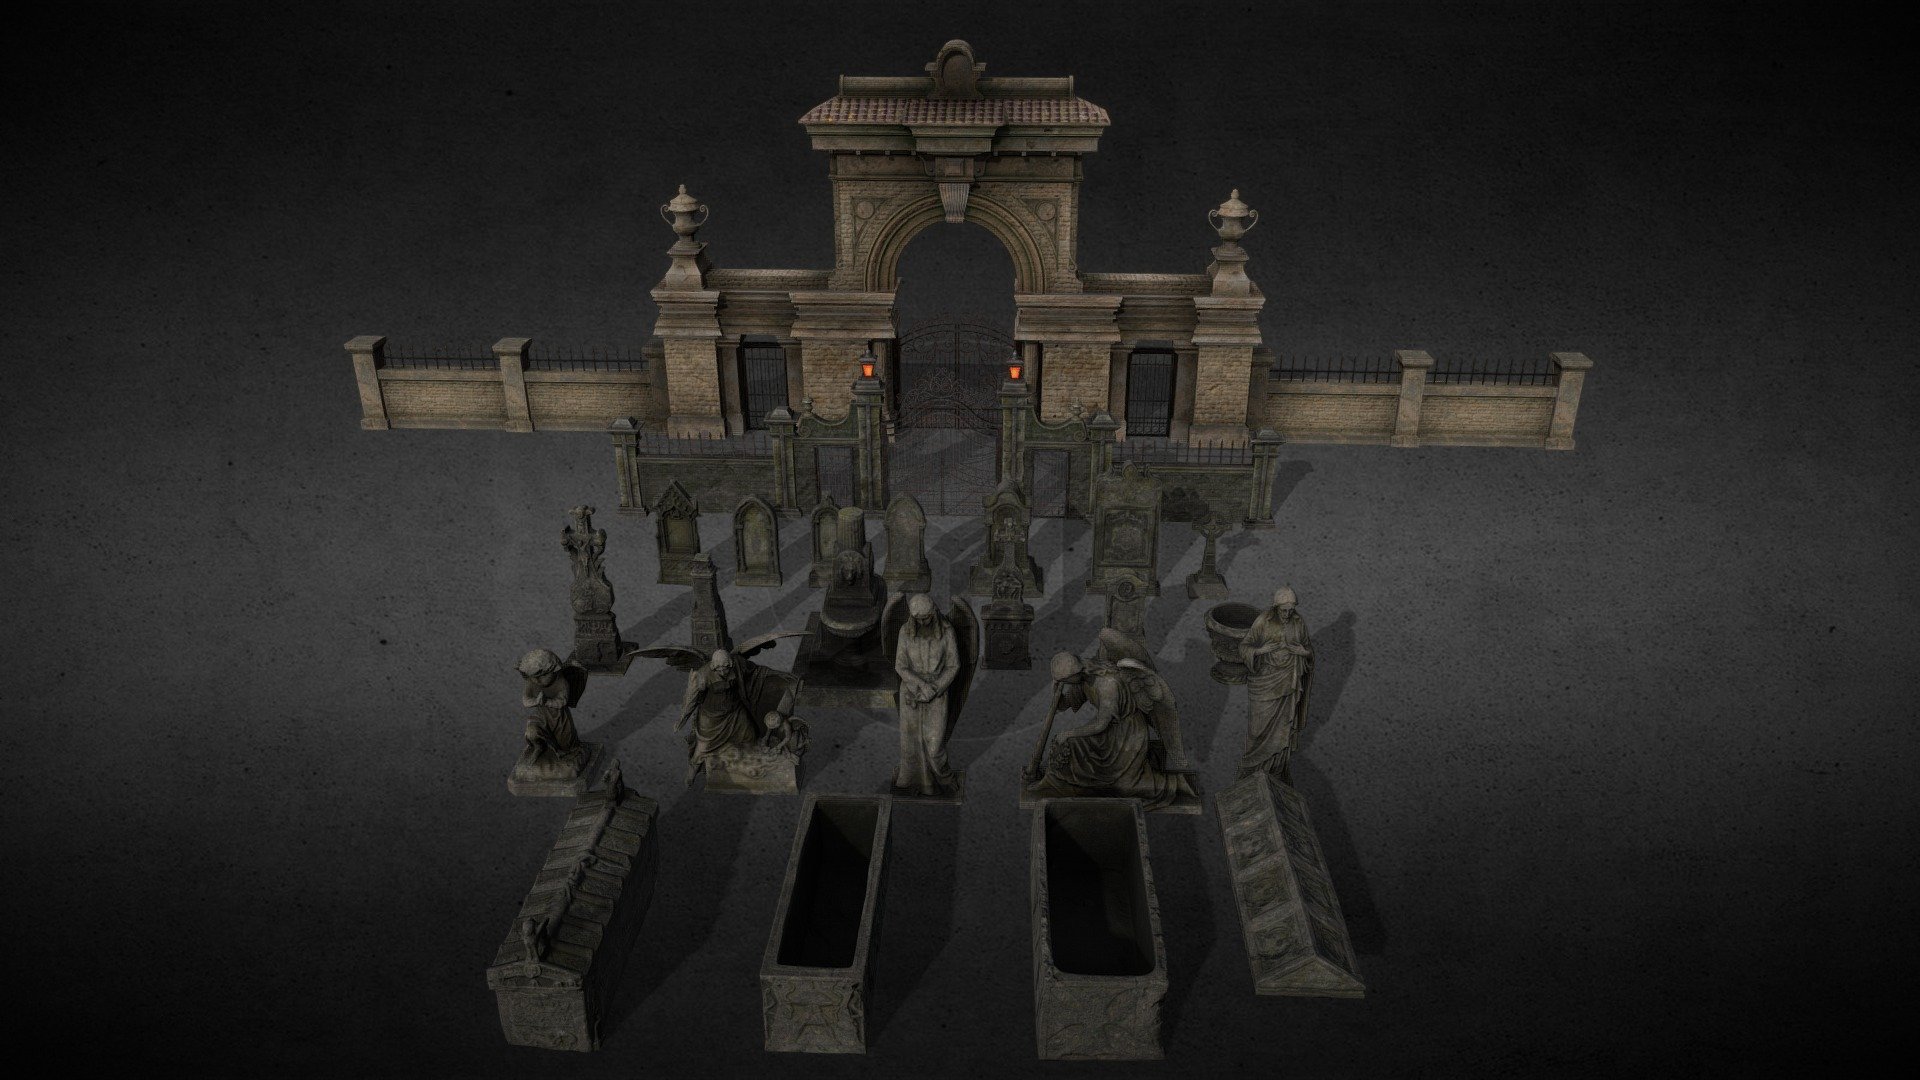 Low poly game ready Graveyard pack.

4096x4096 full pbr texture packs.

Big gate

small gate

7 different Tombstones

6 different ornaments

5 angel statues

3 sacrophagus

Tris counts:

Big gate full&mdash;48K

Small gatefull&mdash;41K

TombStones&ndash;800 Tris to 2.8K

Ornaments&mdash;700 Tris to 2.5K

Angel statues&ndash;2.5K to 5.5K

Sacropaghus&mdash;300 Tris to 2K

cgtradercom/3d-models/exterior/street-exterior/gothic-graveyard-pack - Gothic Cemetery Pack - 3D model by 3DBazaar (@muratosan) 3d model